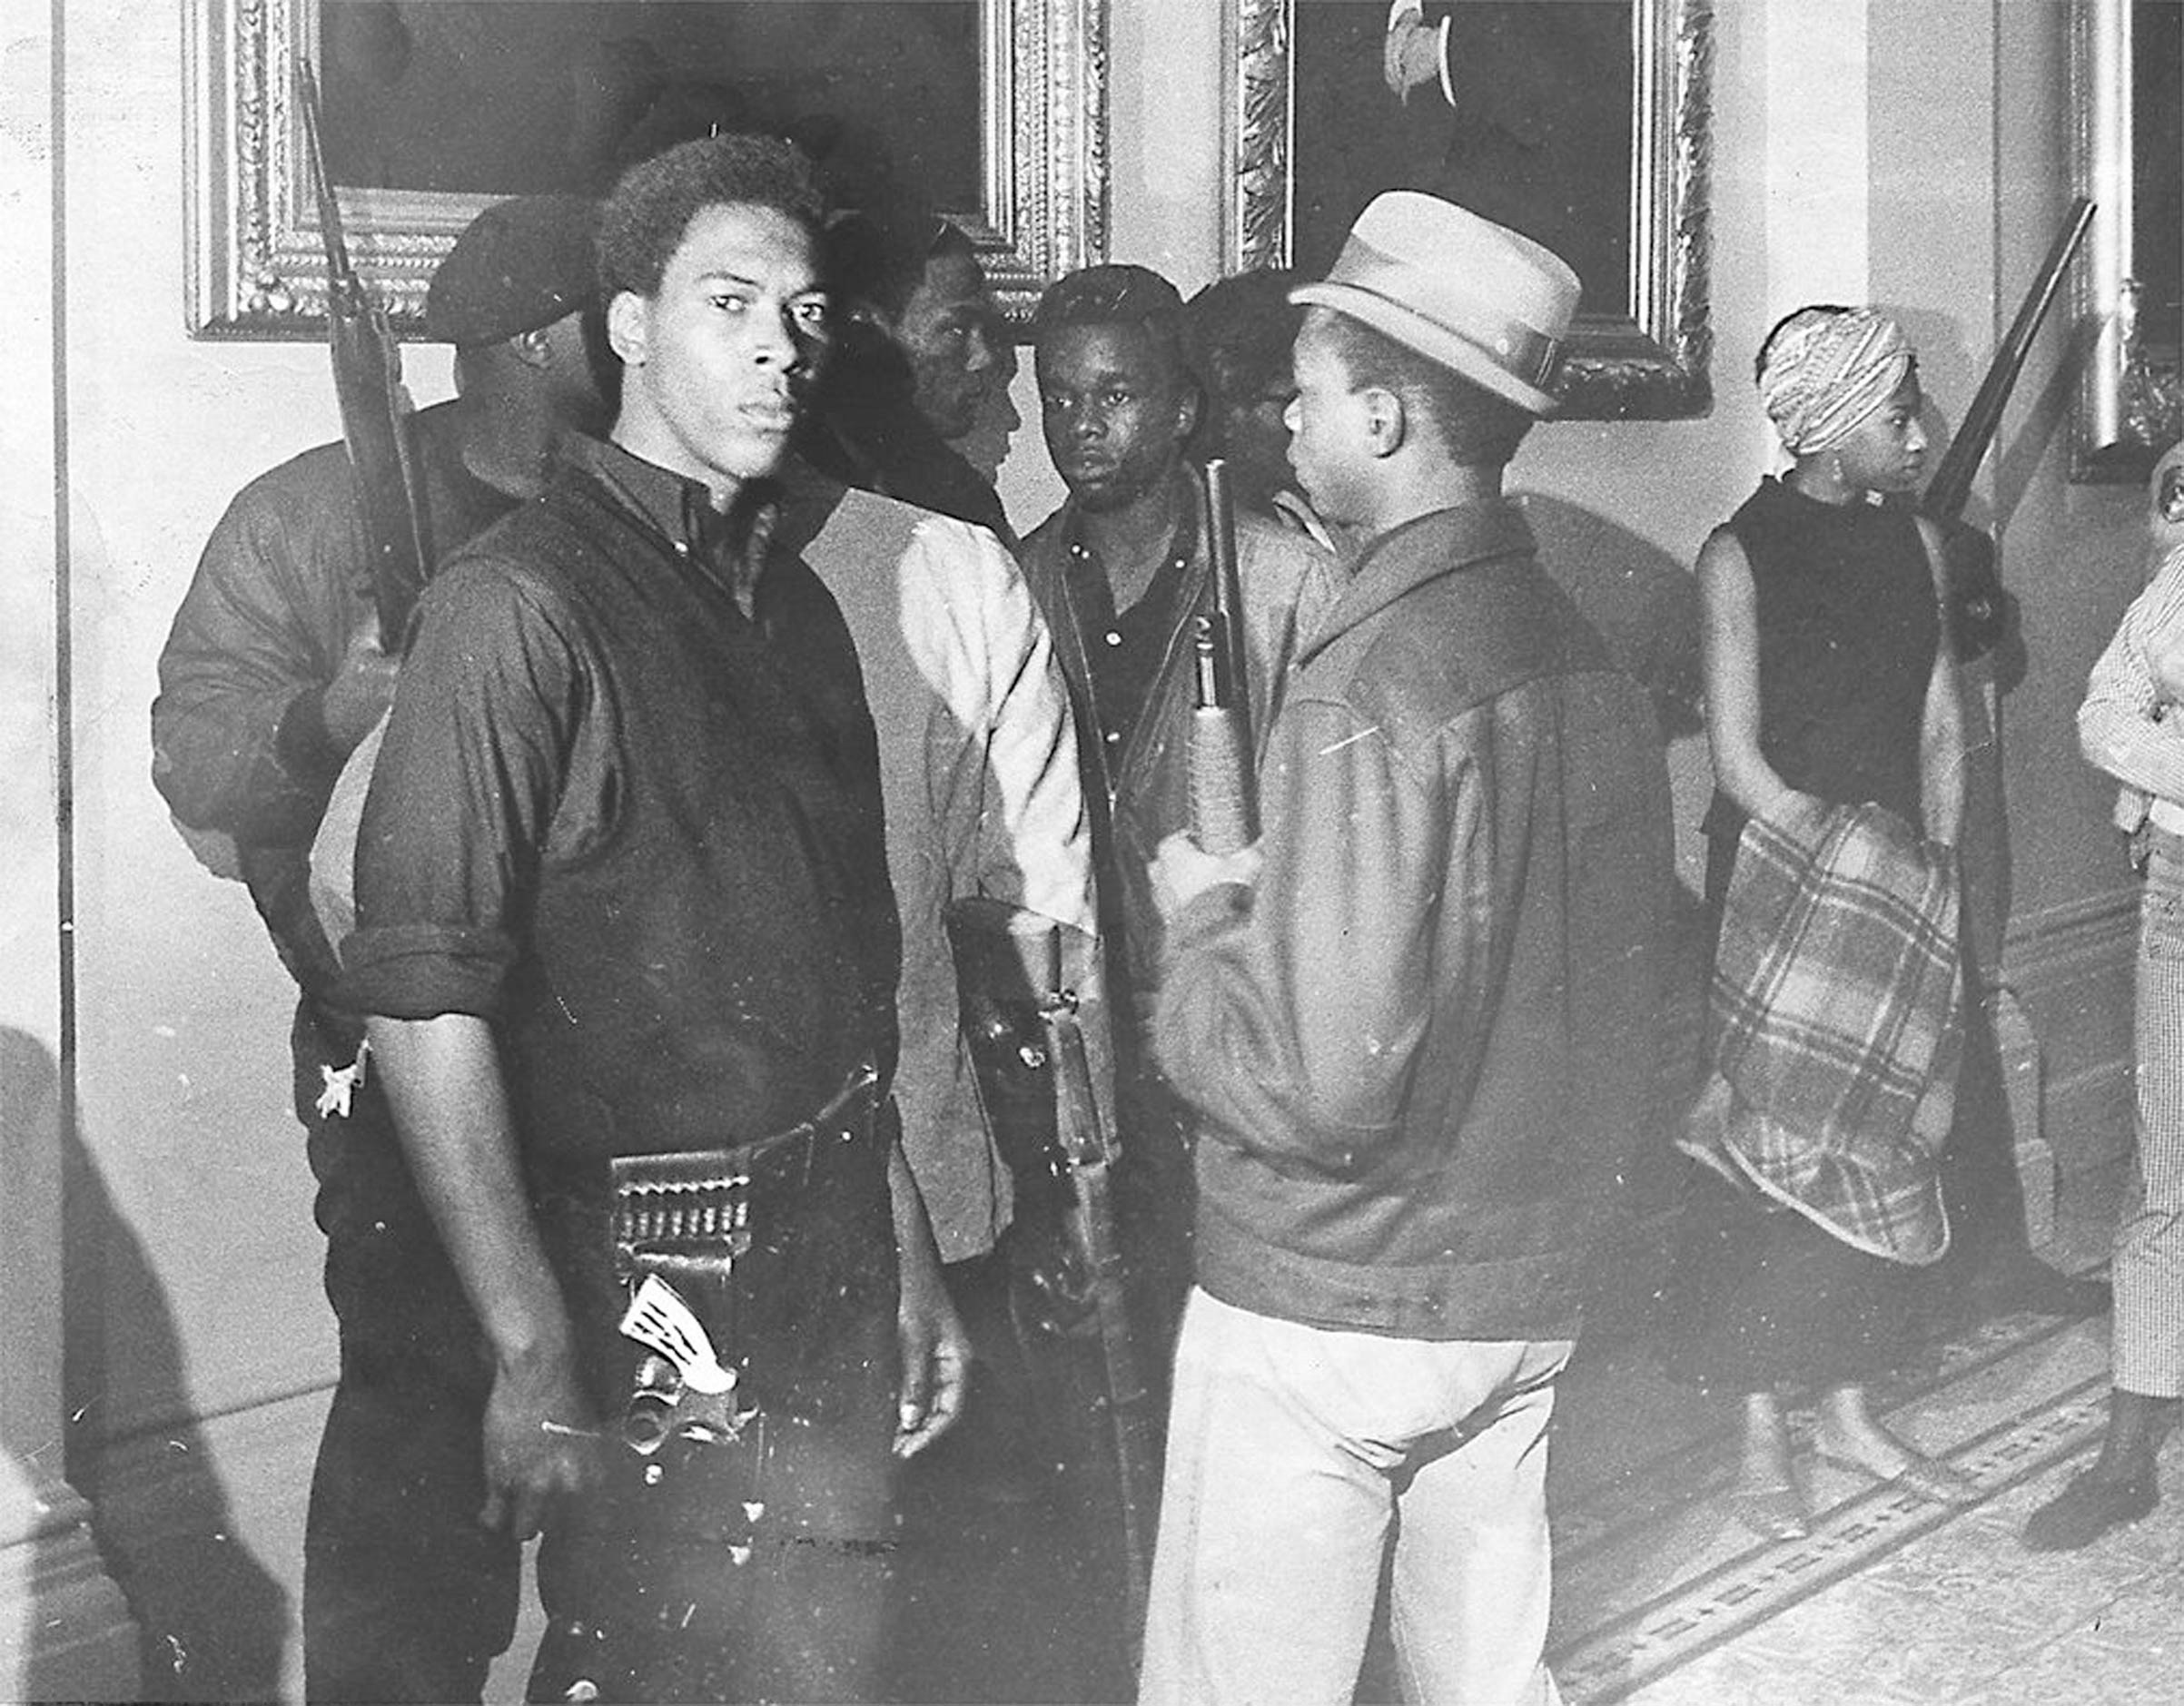 Members of the Black Panthers hold guns during the group's protest at the California Assembly in May 1967 in Sacramento, California. (Sacramento Bee/MCT—Getty Images)